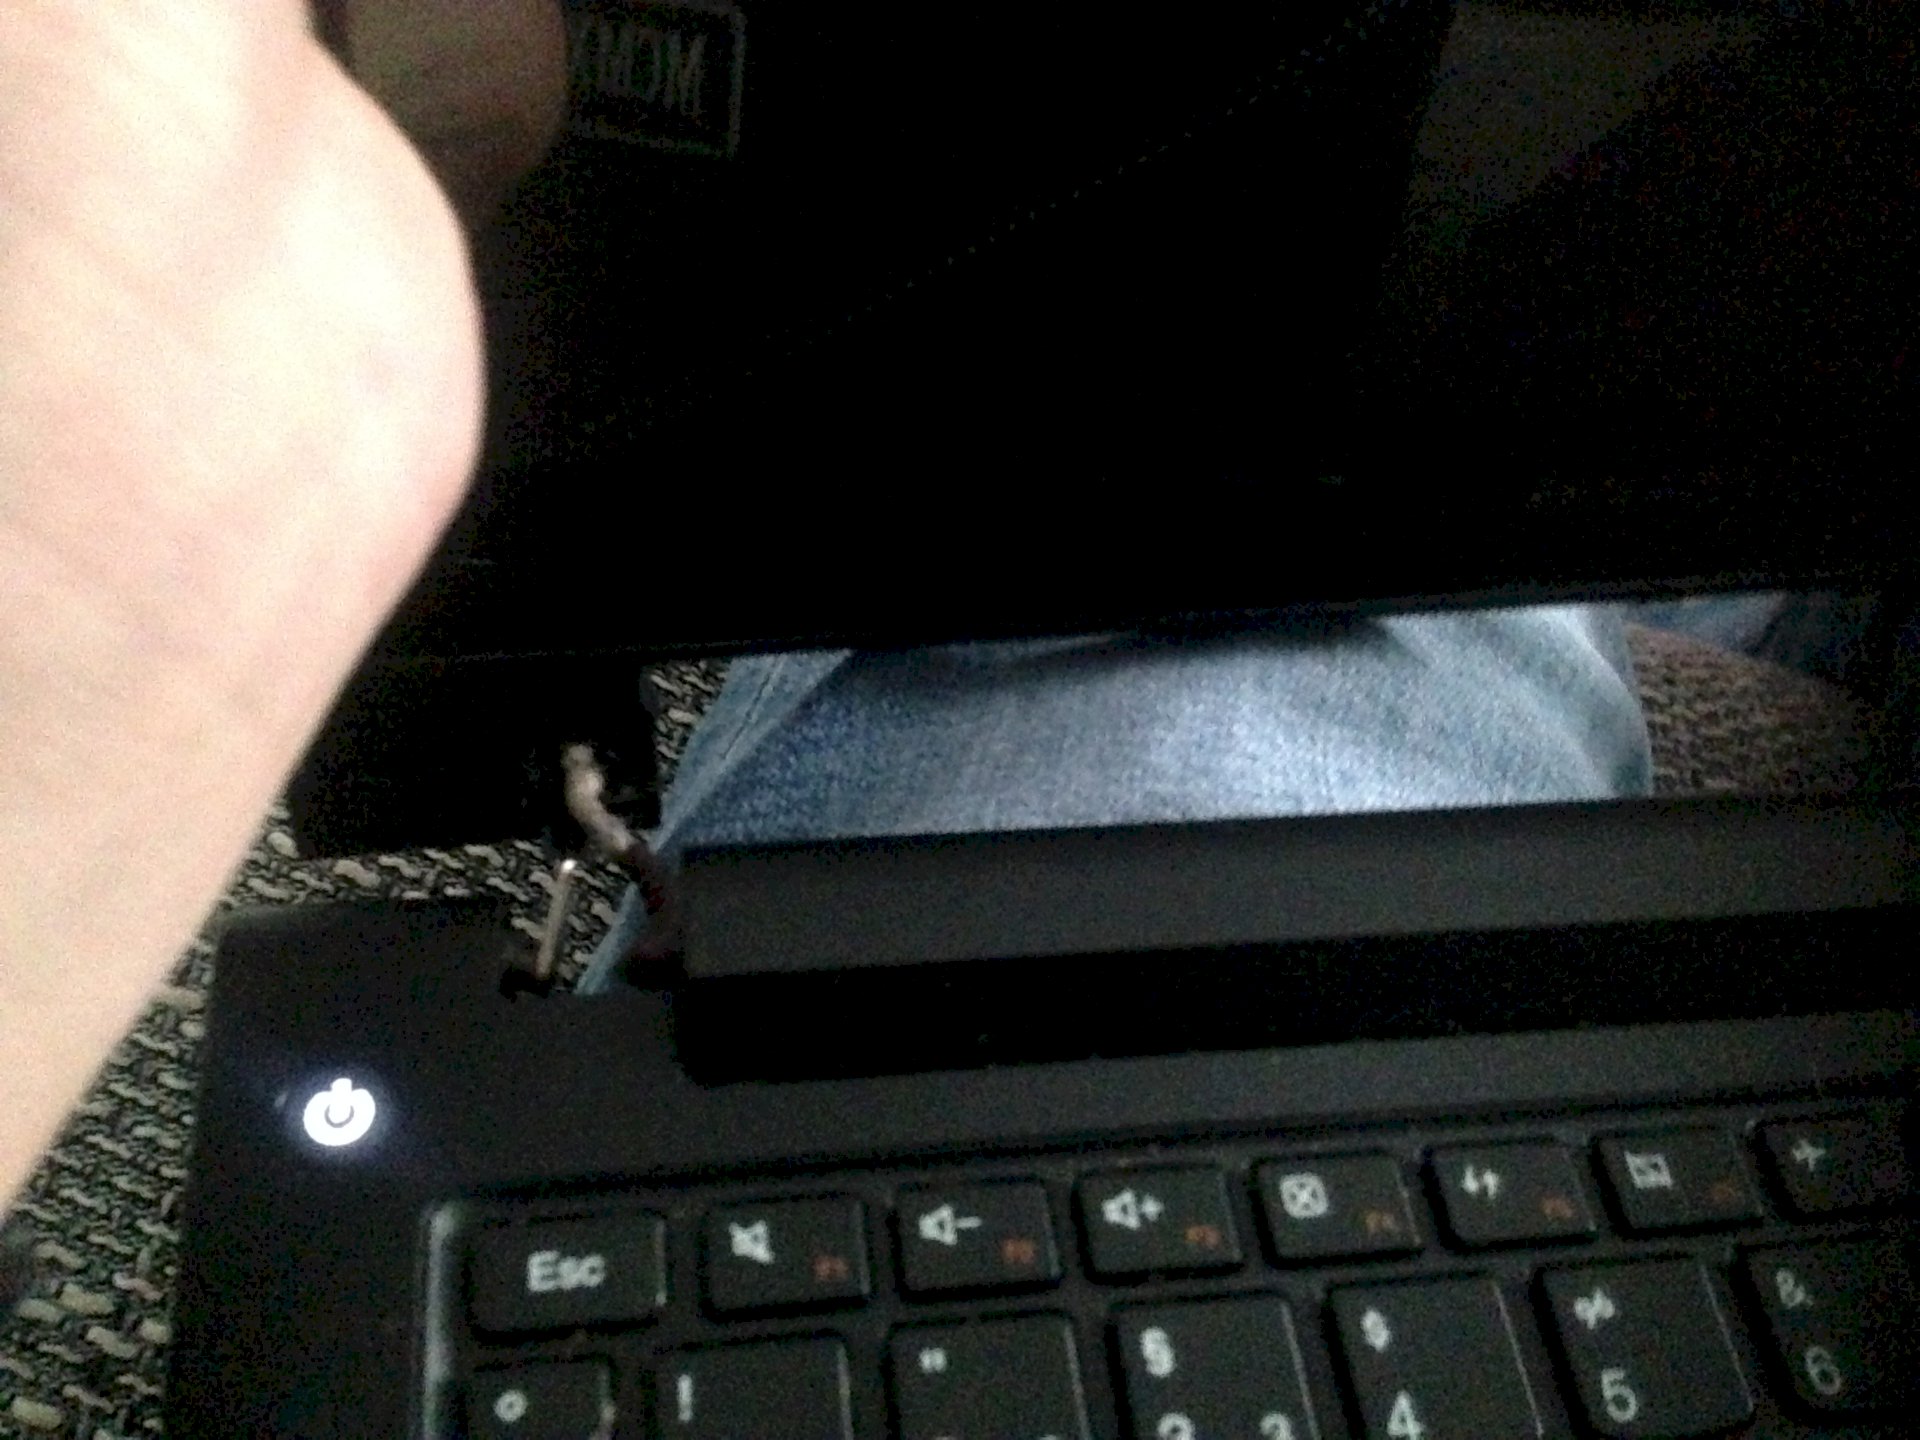 Laptop: Hinges broken and cables ripped, what can I do